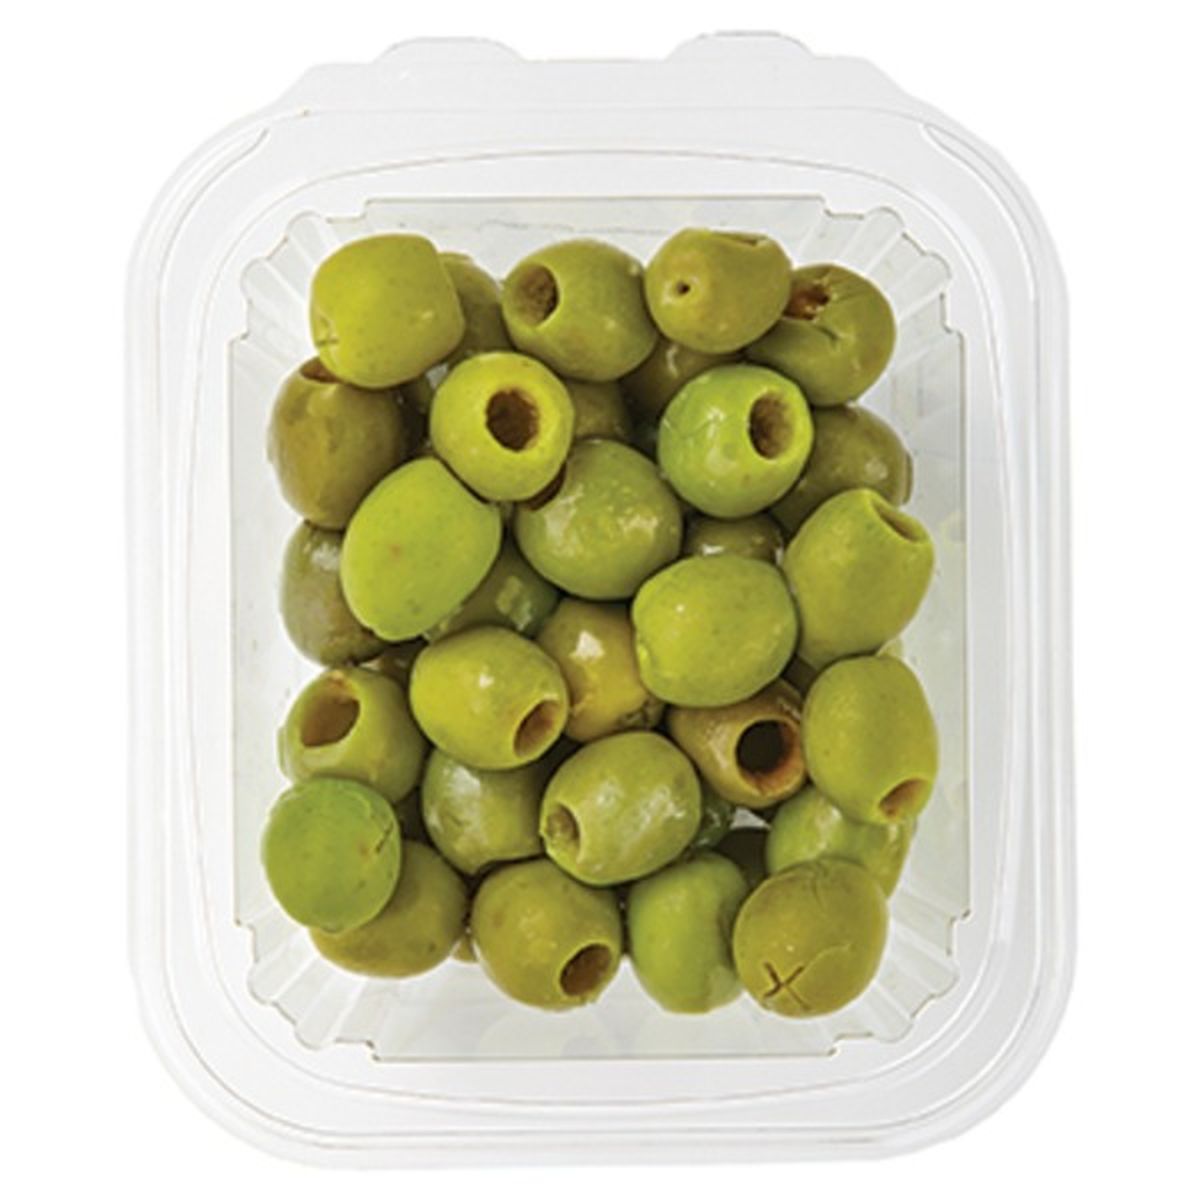 Calories in Wegmans Castelvetrano Pitted Olives